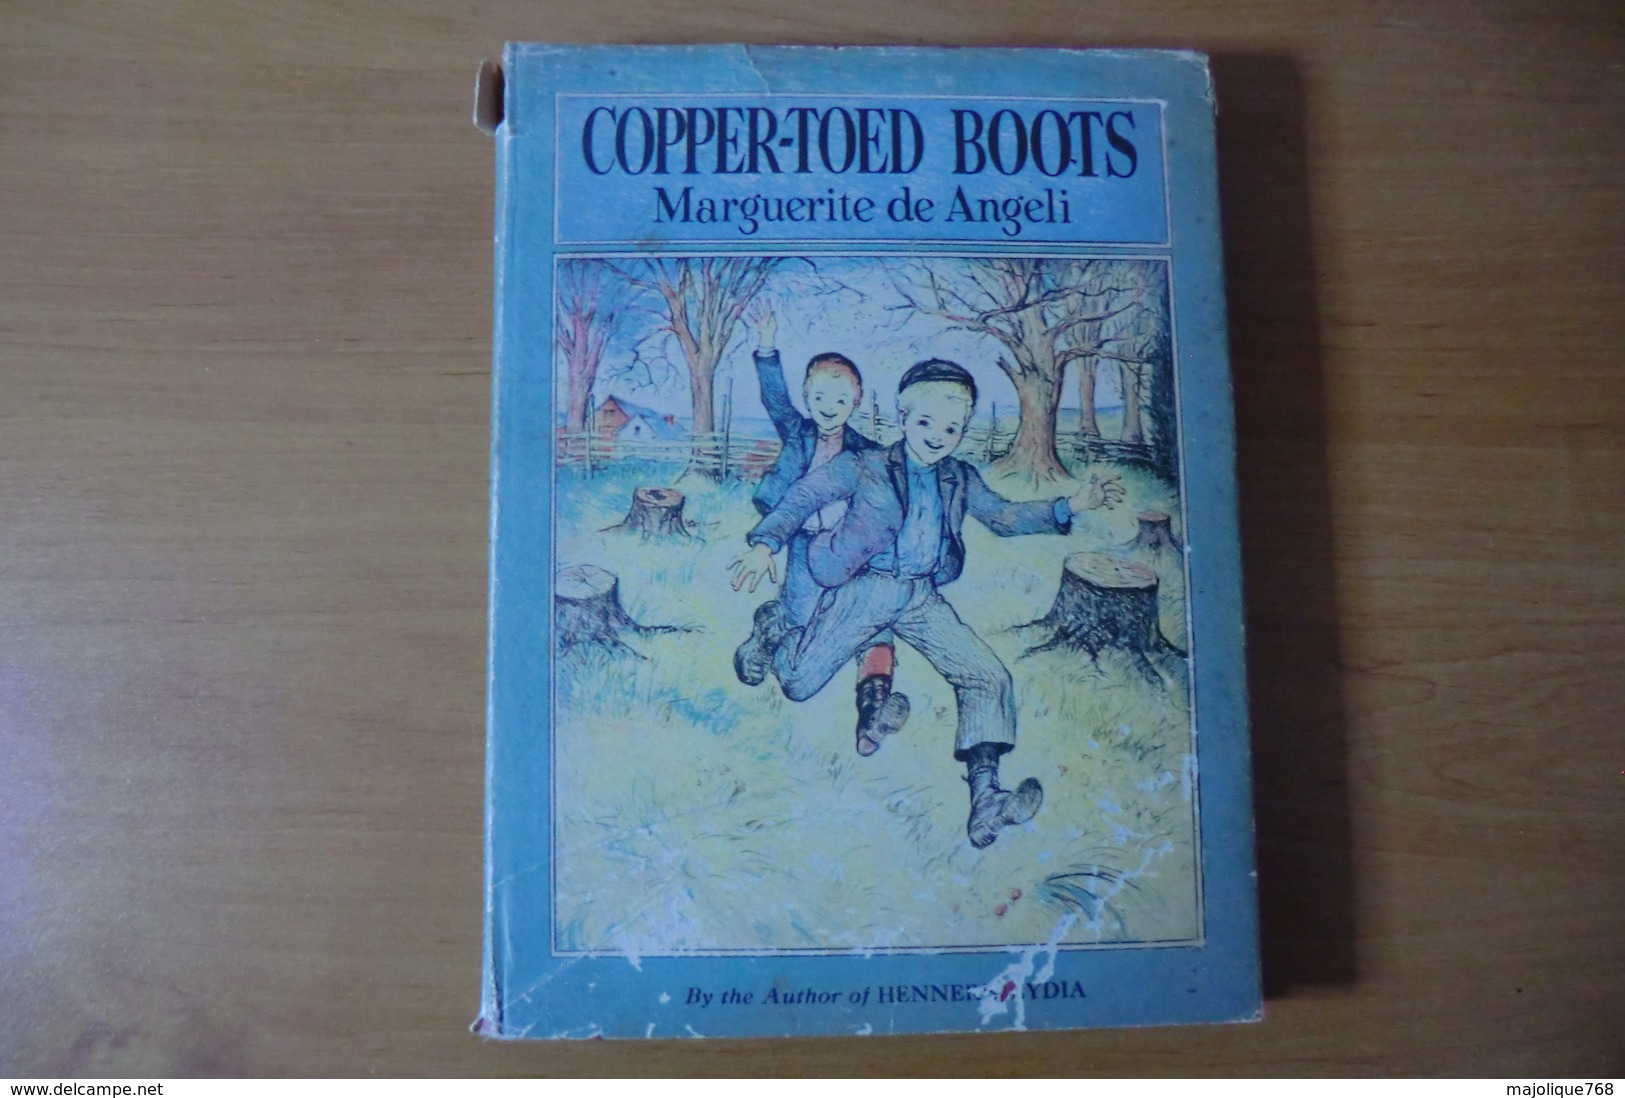 Copper-Toed Boots - Marguerite De Angeli - By The Author Of Henner's Lydia - 1938 -avec Sa Jaquette - Science Fiction